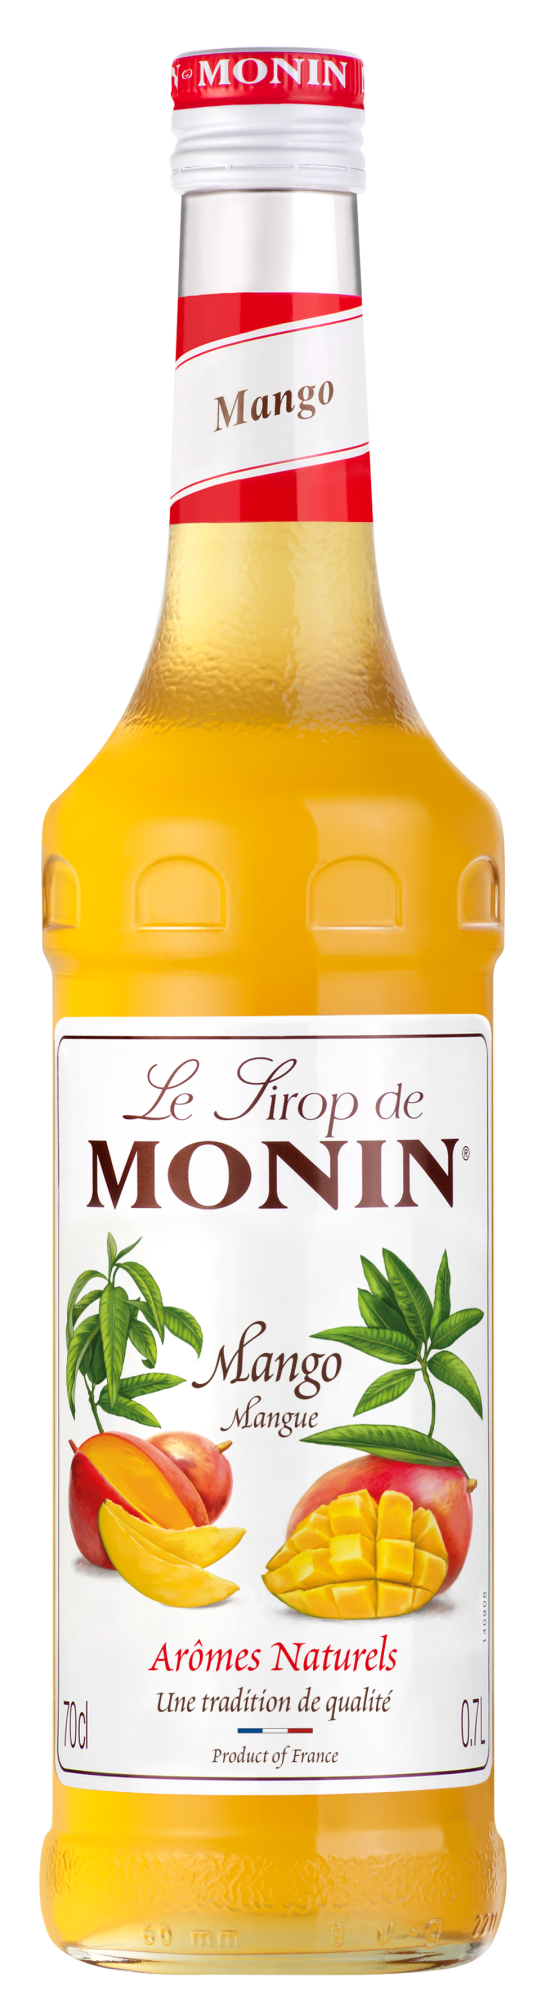 Buy MONIN Mango Syrup. This syrup can be used in lemonades, iced teas, frappes, cocktails and mocktails